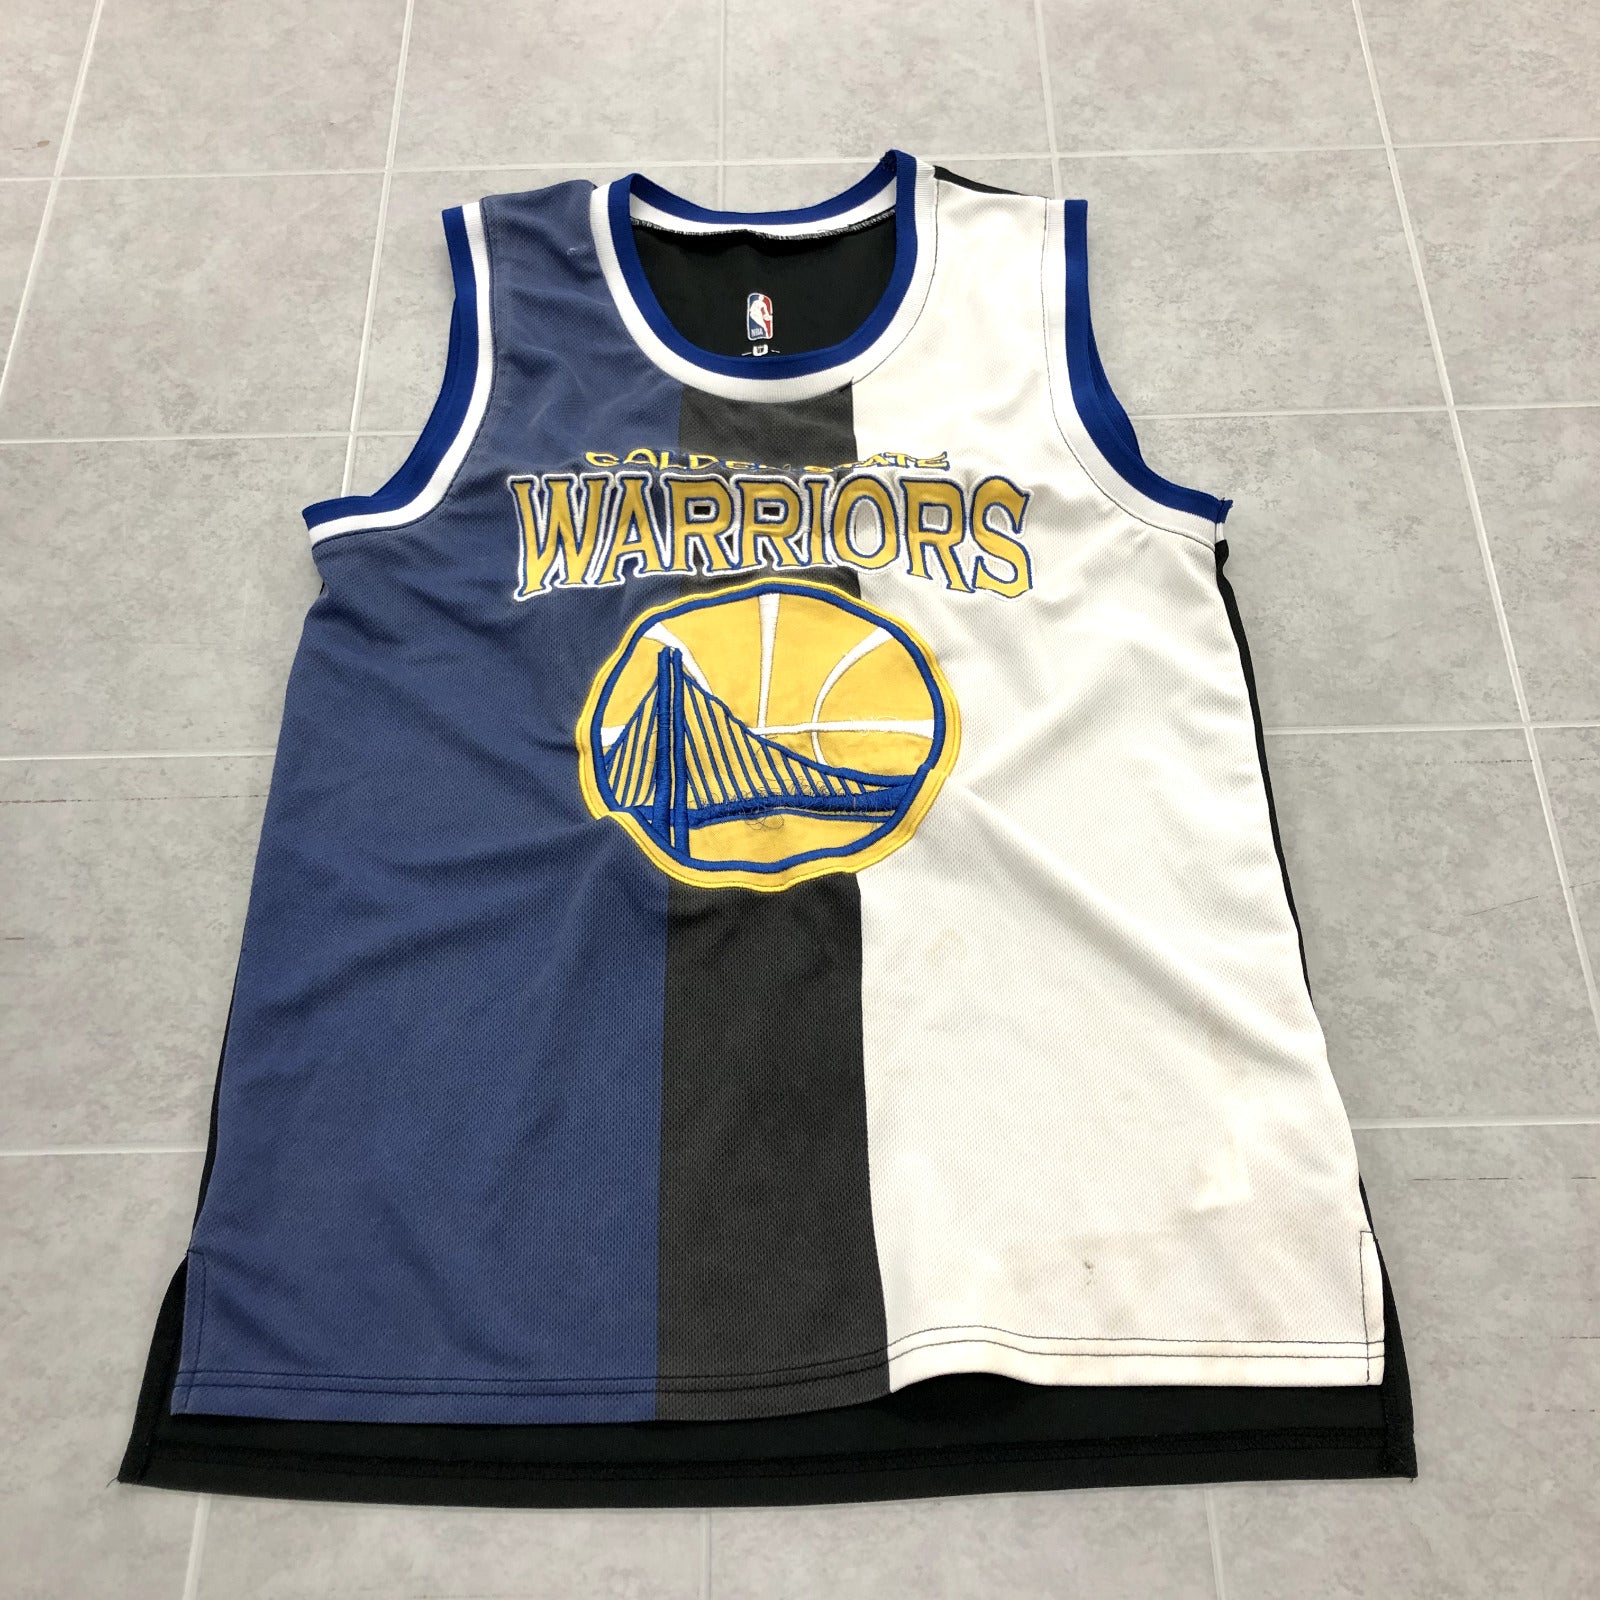 NBA Multicolor Sleeveless Golden State Warriors Active Wear Jersey Adult Size M